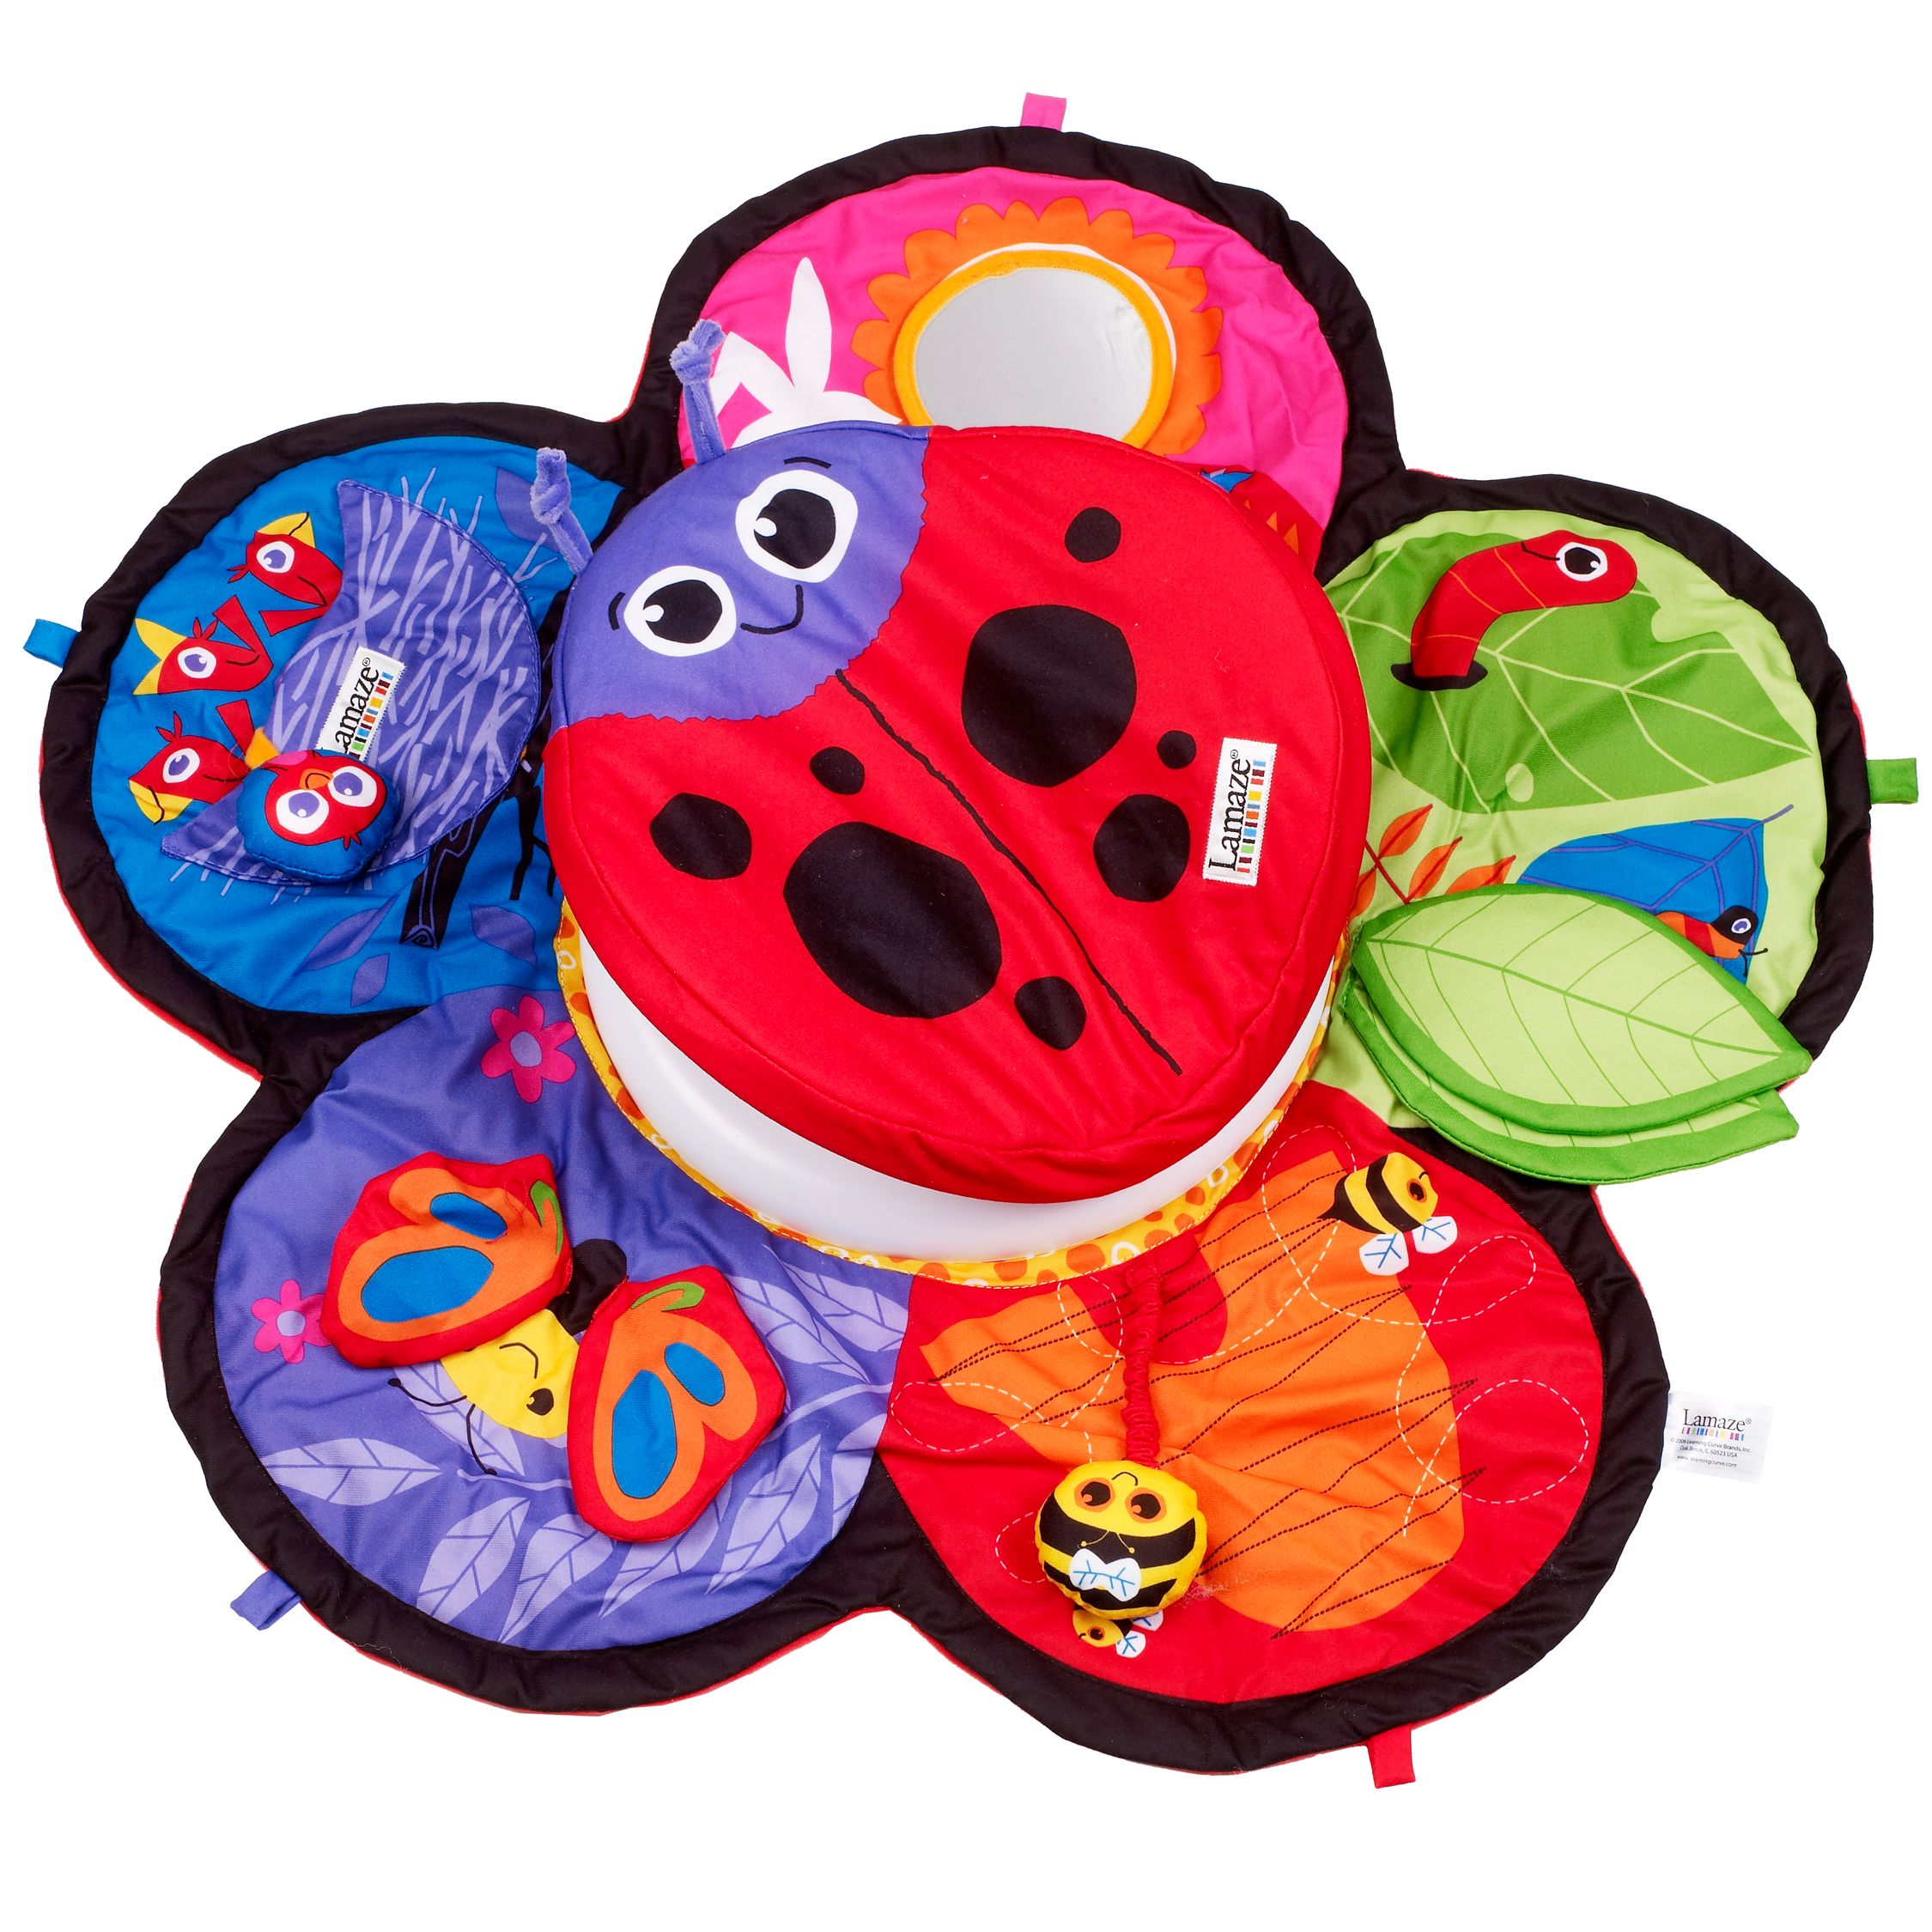 Lamaze Spin and Explore Garden Gym was £24.99 now £17.20